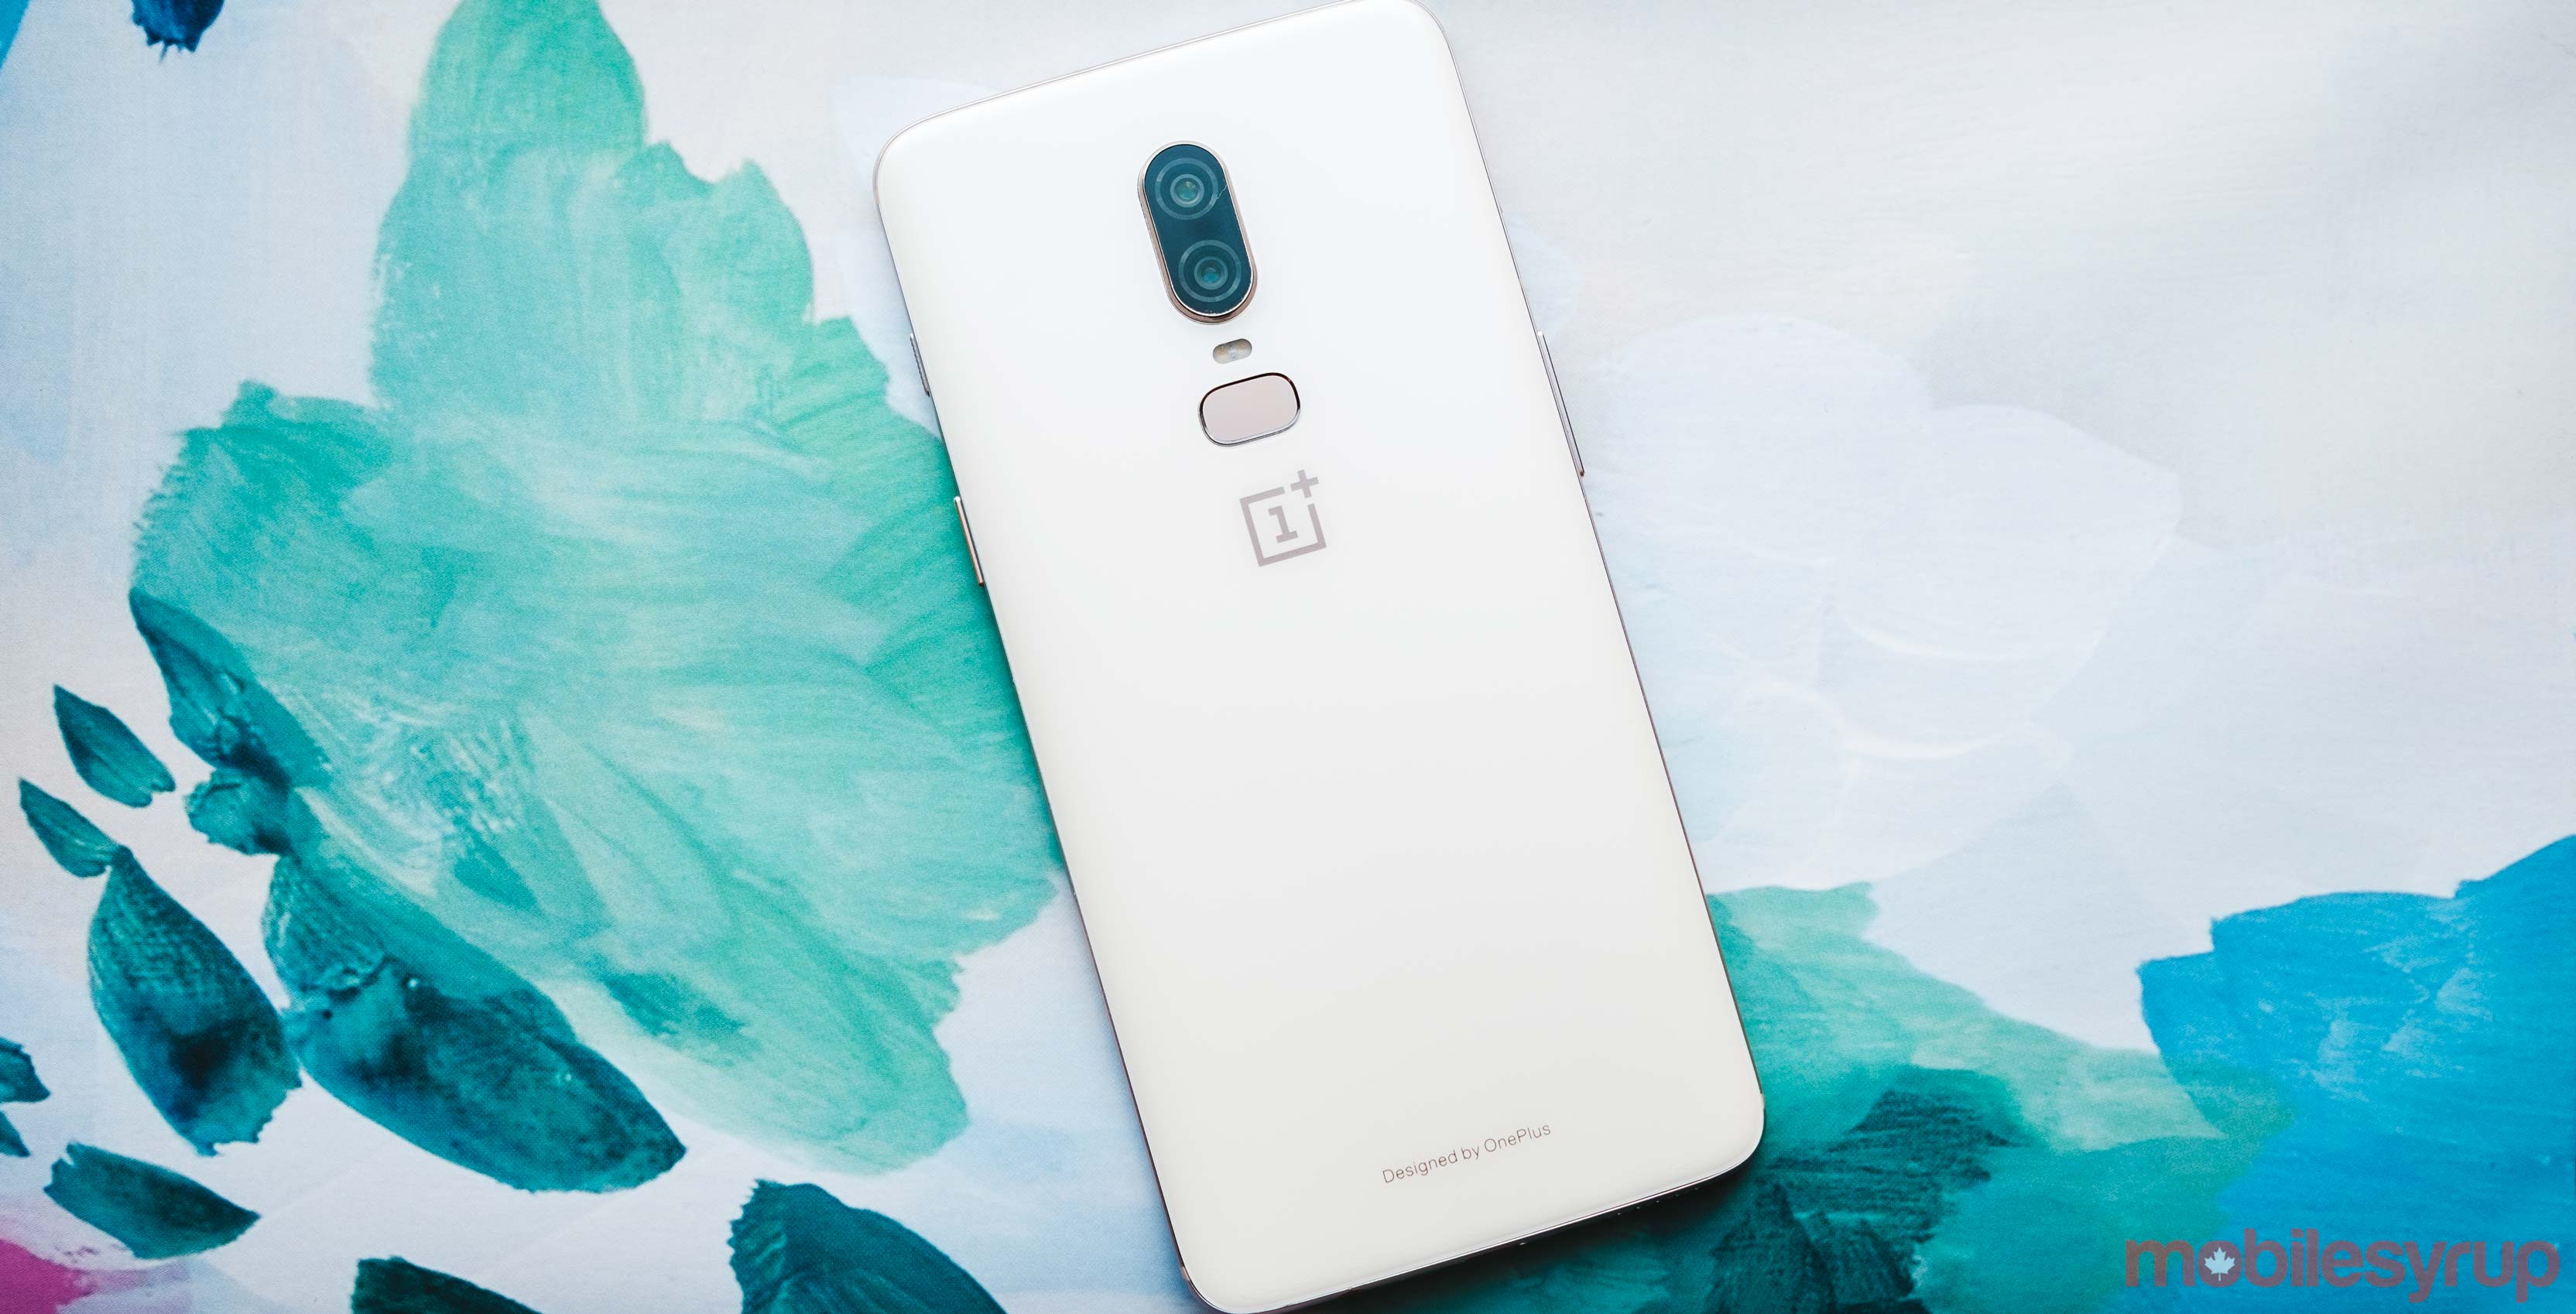 OnePlus latest' flagship, the OnePlus 6